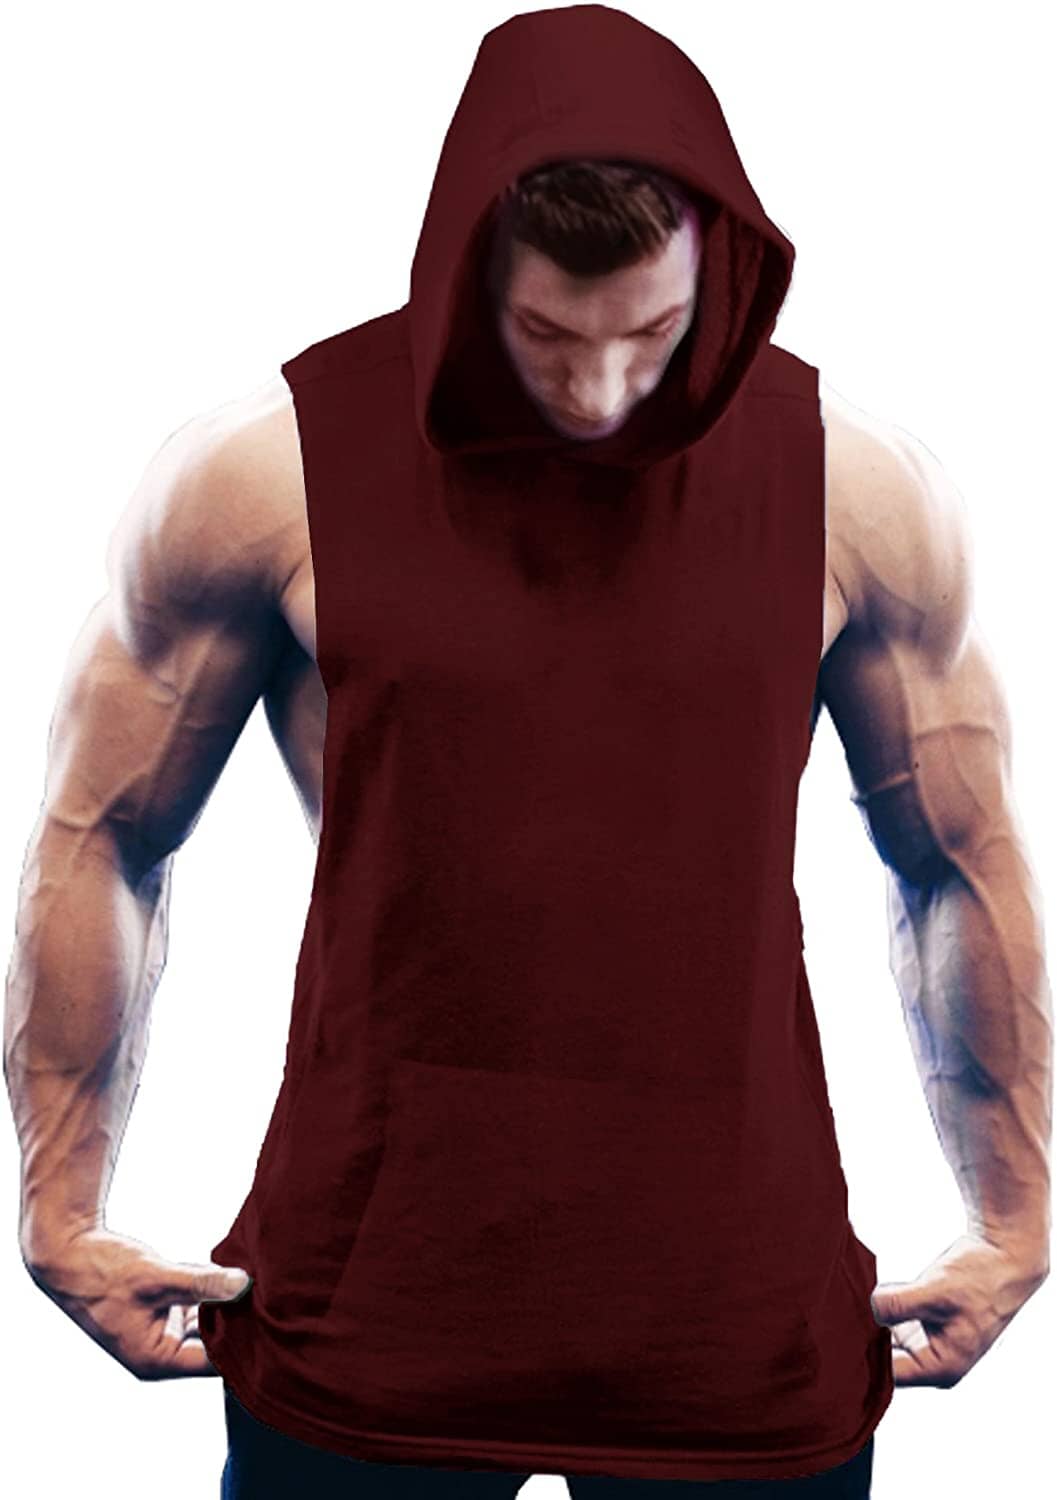 Workout Bodybuilding Muscle Sleeveless Hooded Tank Top (US Only) Tank Tops COOFANDY Store Wine Red S 